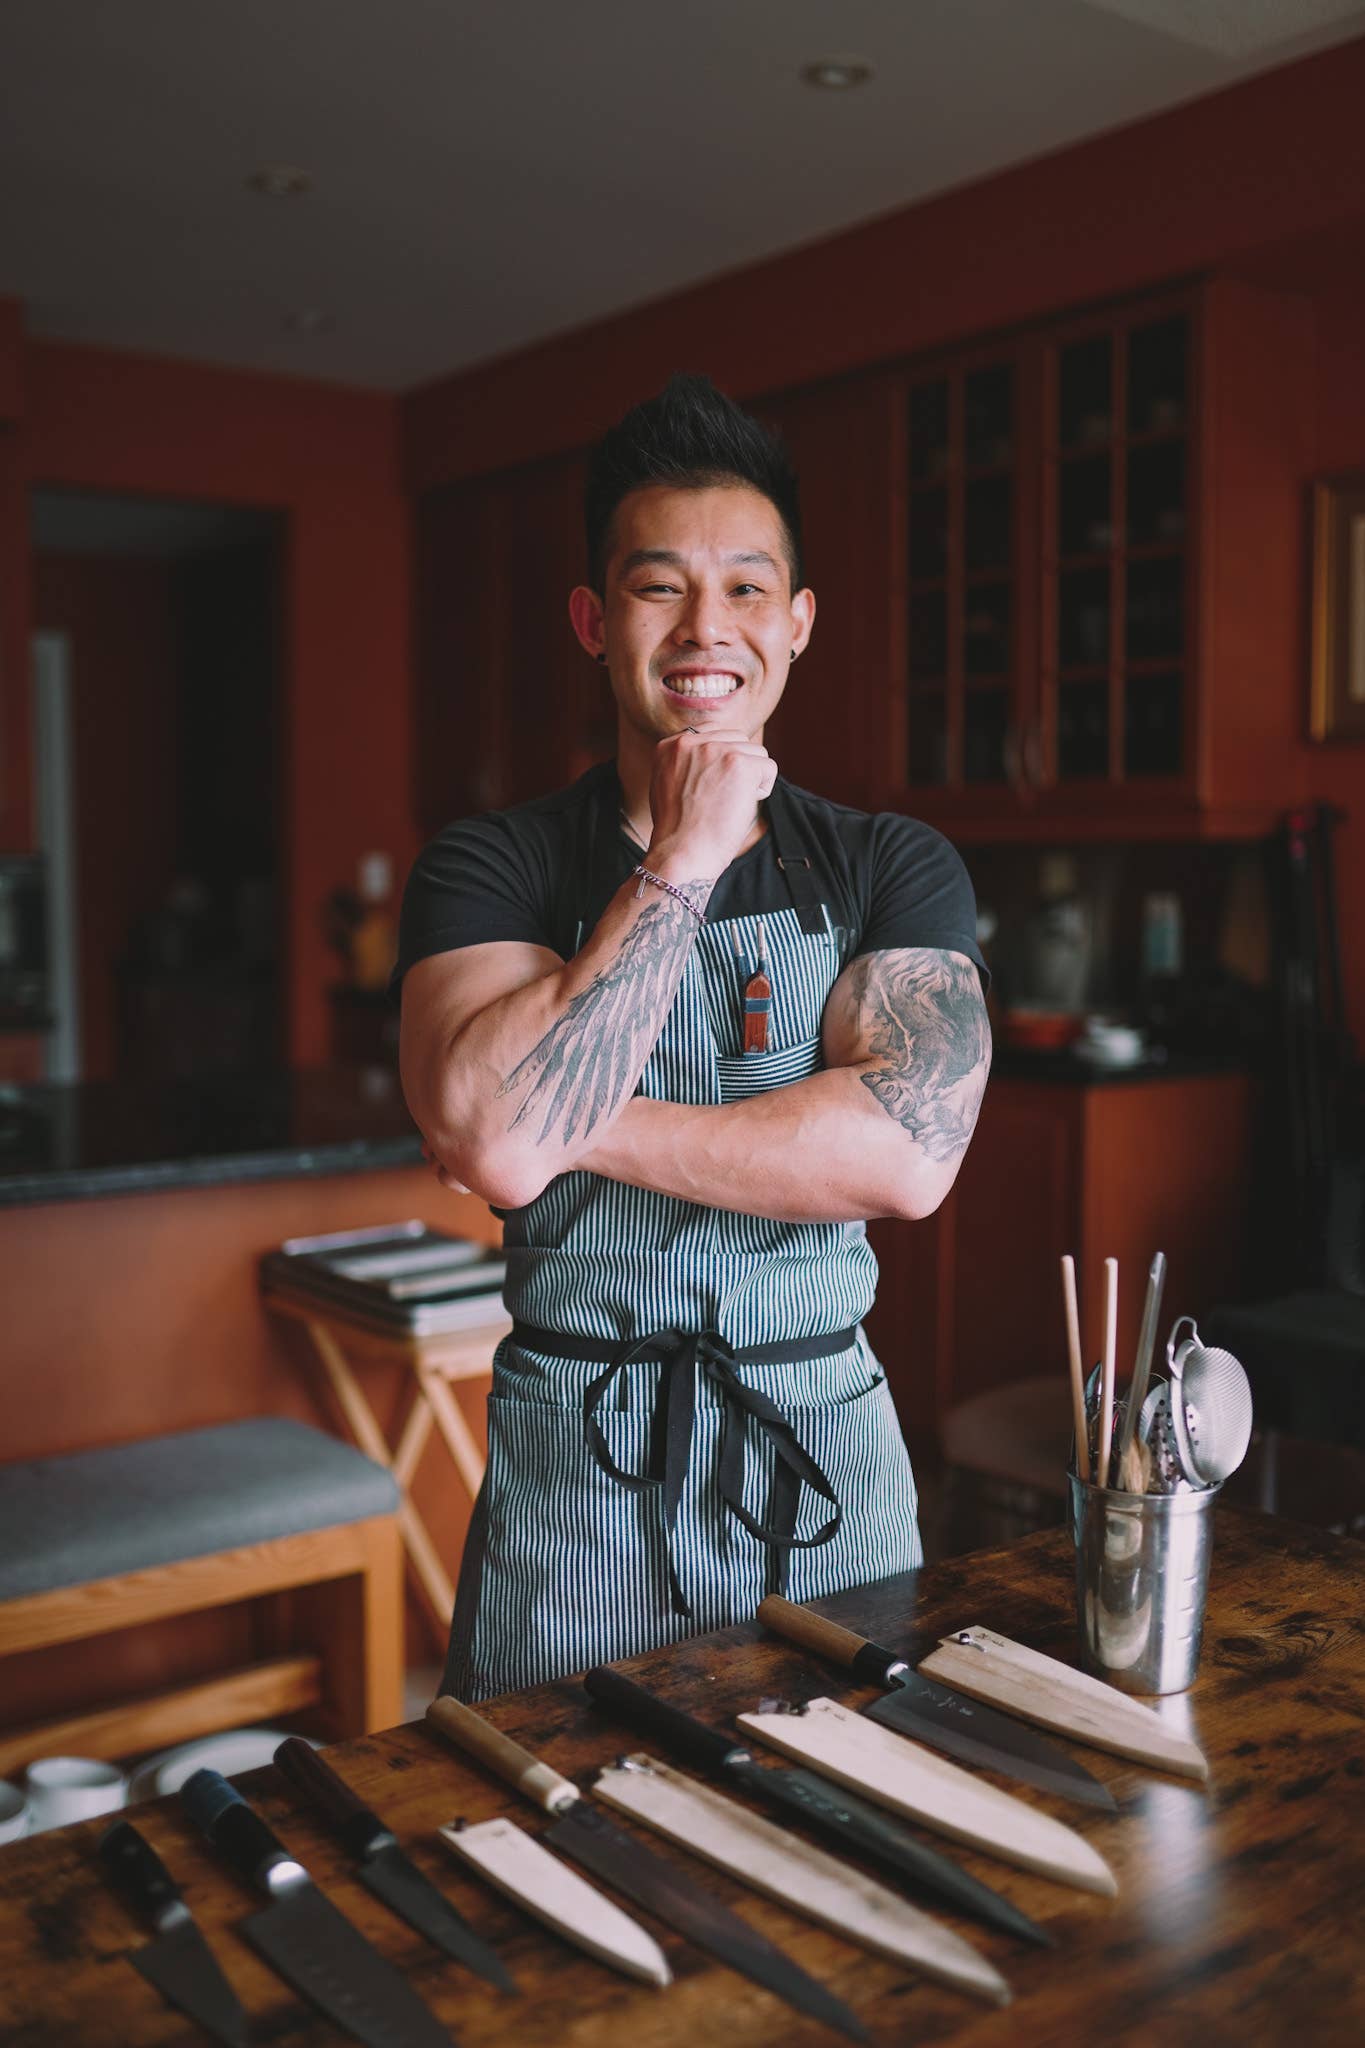 Toronto chef Wallace Wong posing in front of chef knives